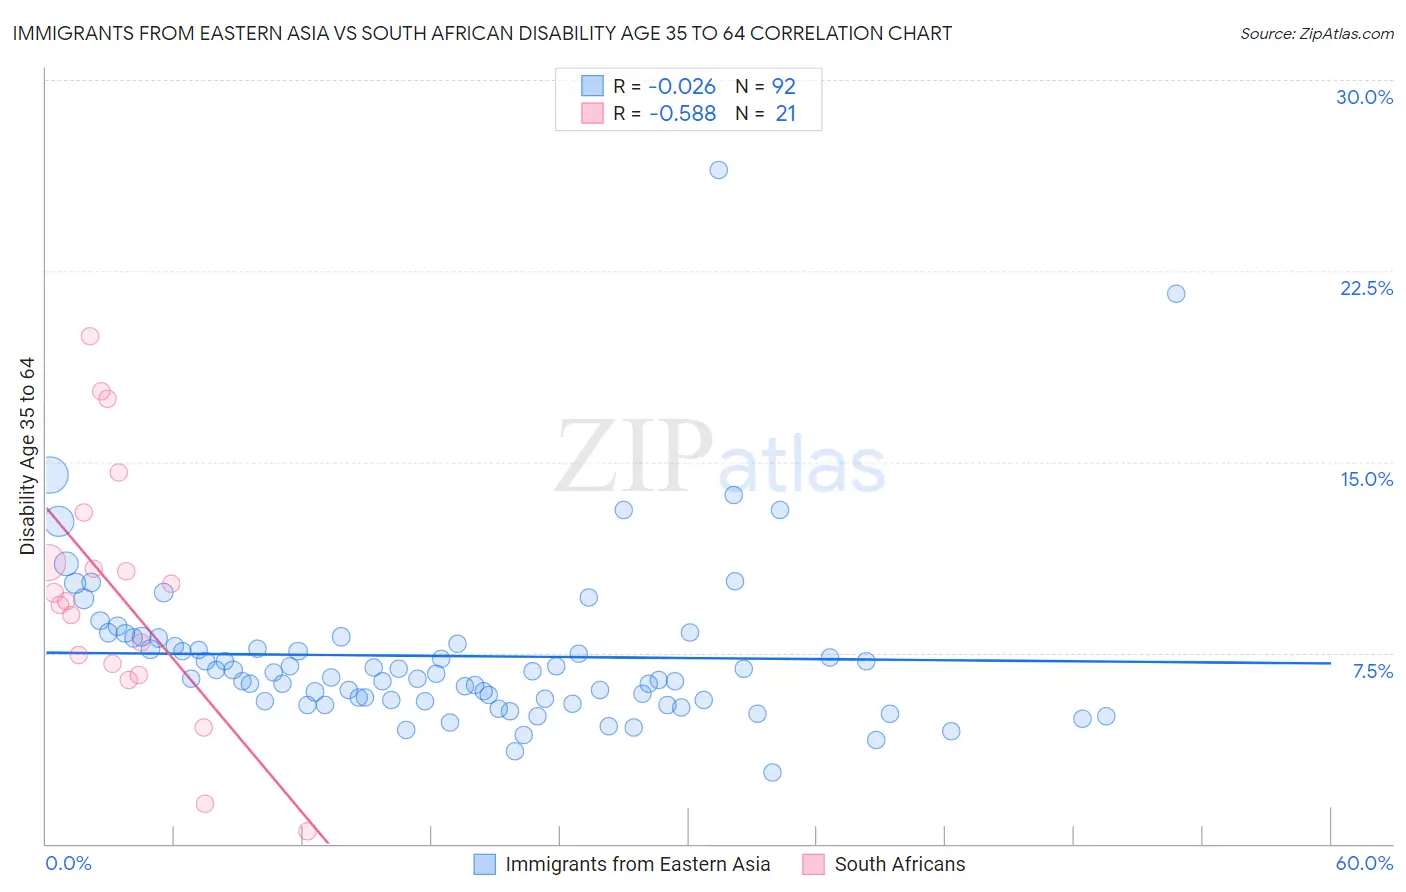 Immigrants from Eastern Asia vs South African Disability Age 35 to 64